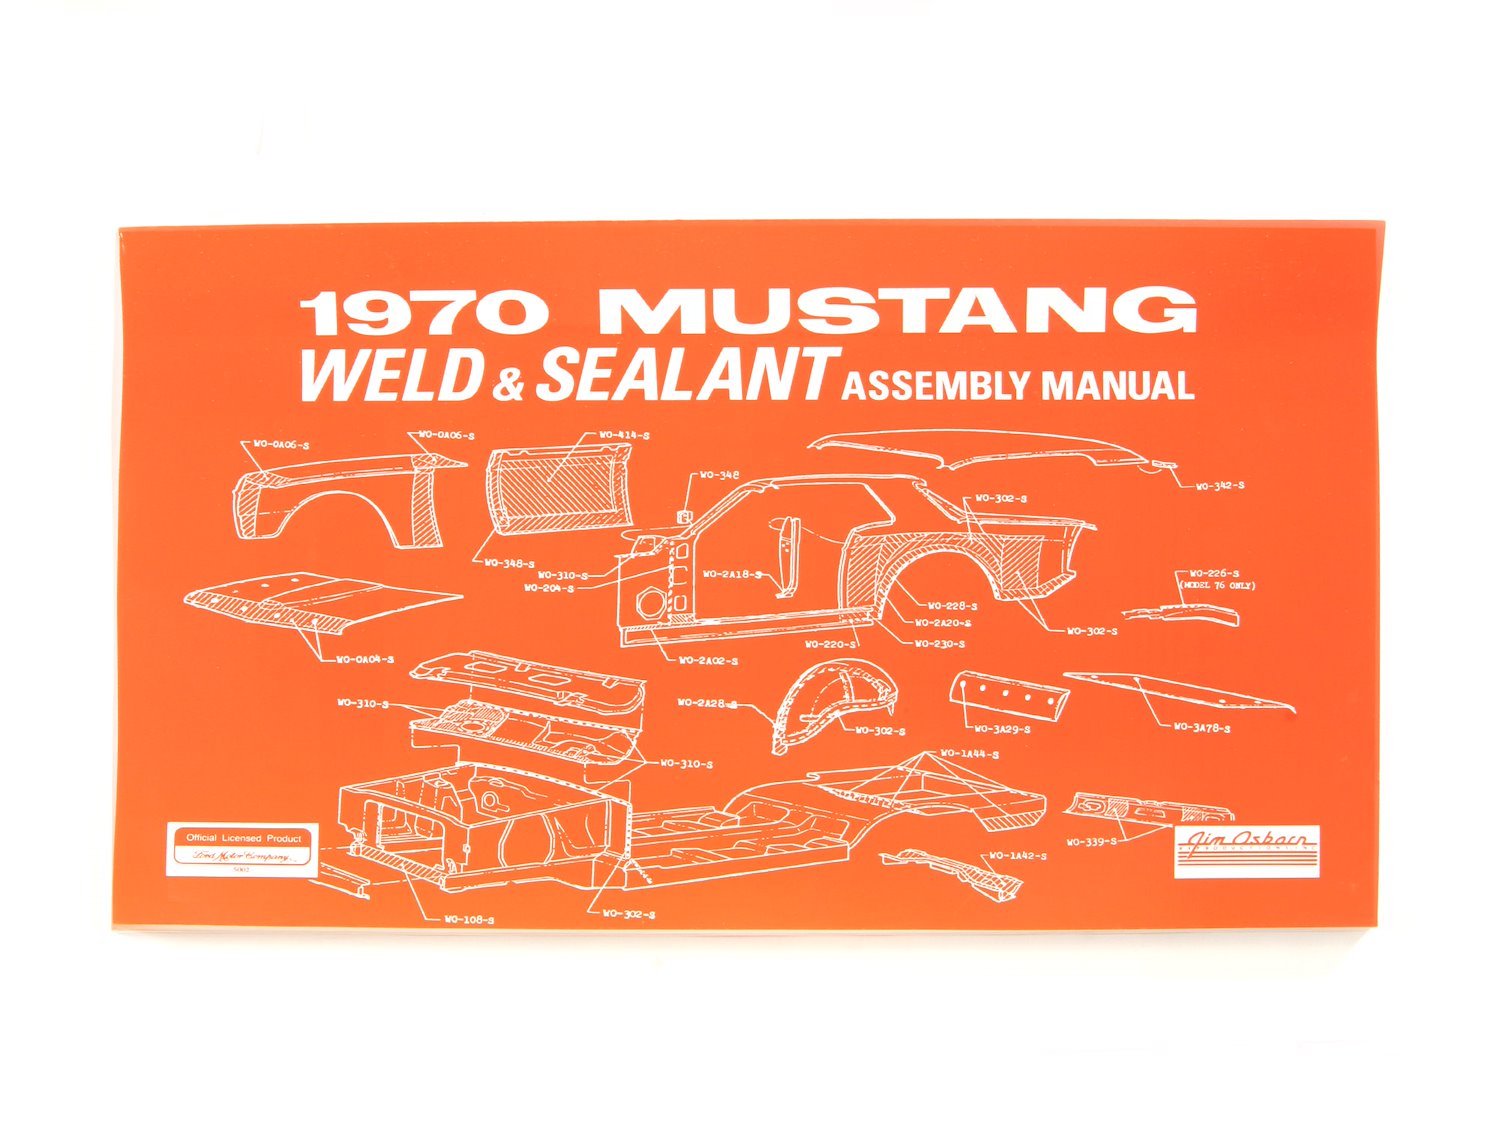 Weld & Sealant Assembly Manual for 1970 Ford